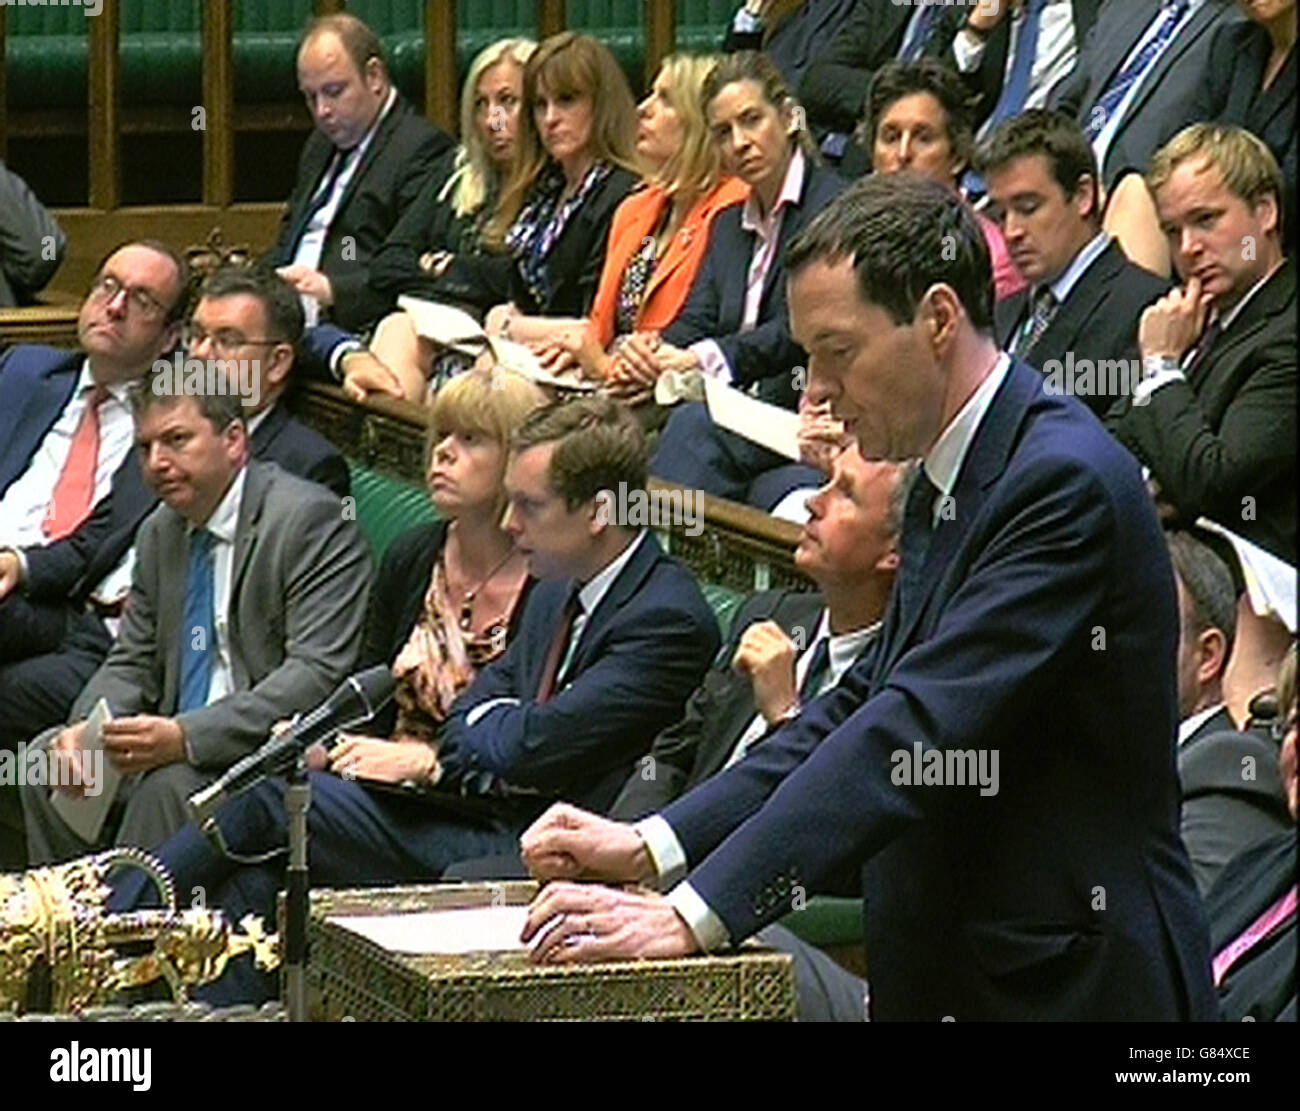 Chancellor of the Exchequer George Osborne makes a statement to MPs in the House of Commons, London following the Greek referendum vote to reject the austerity terms demanded by its international creditors. Stock Photo